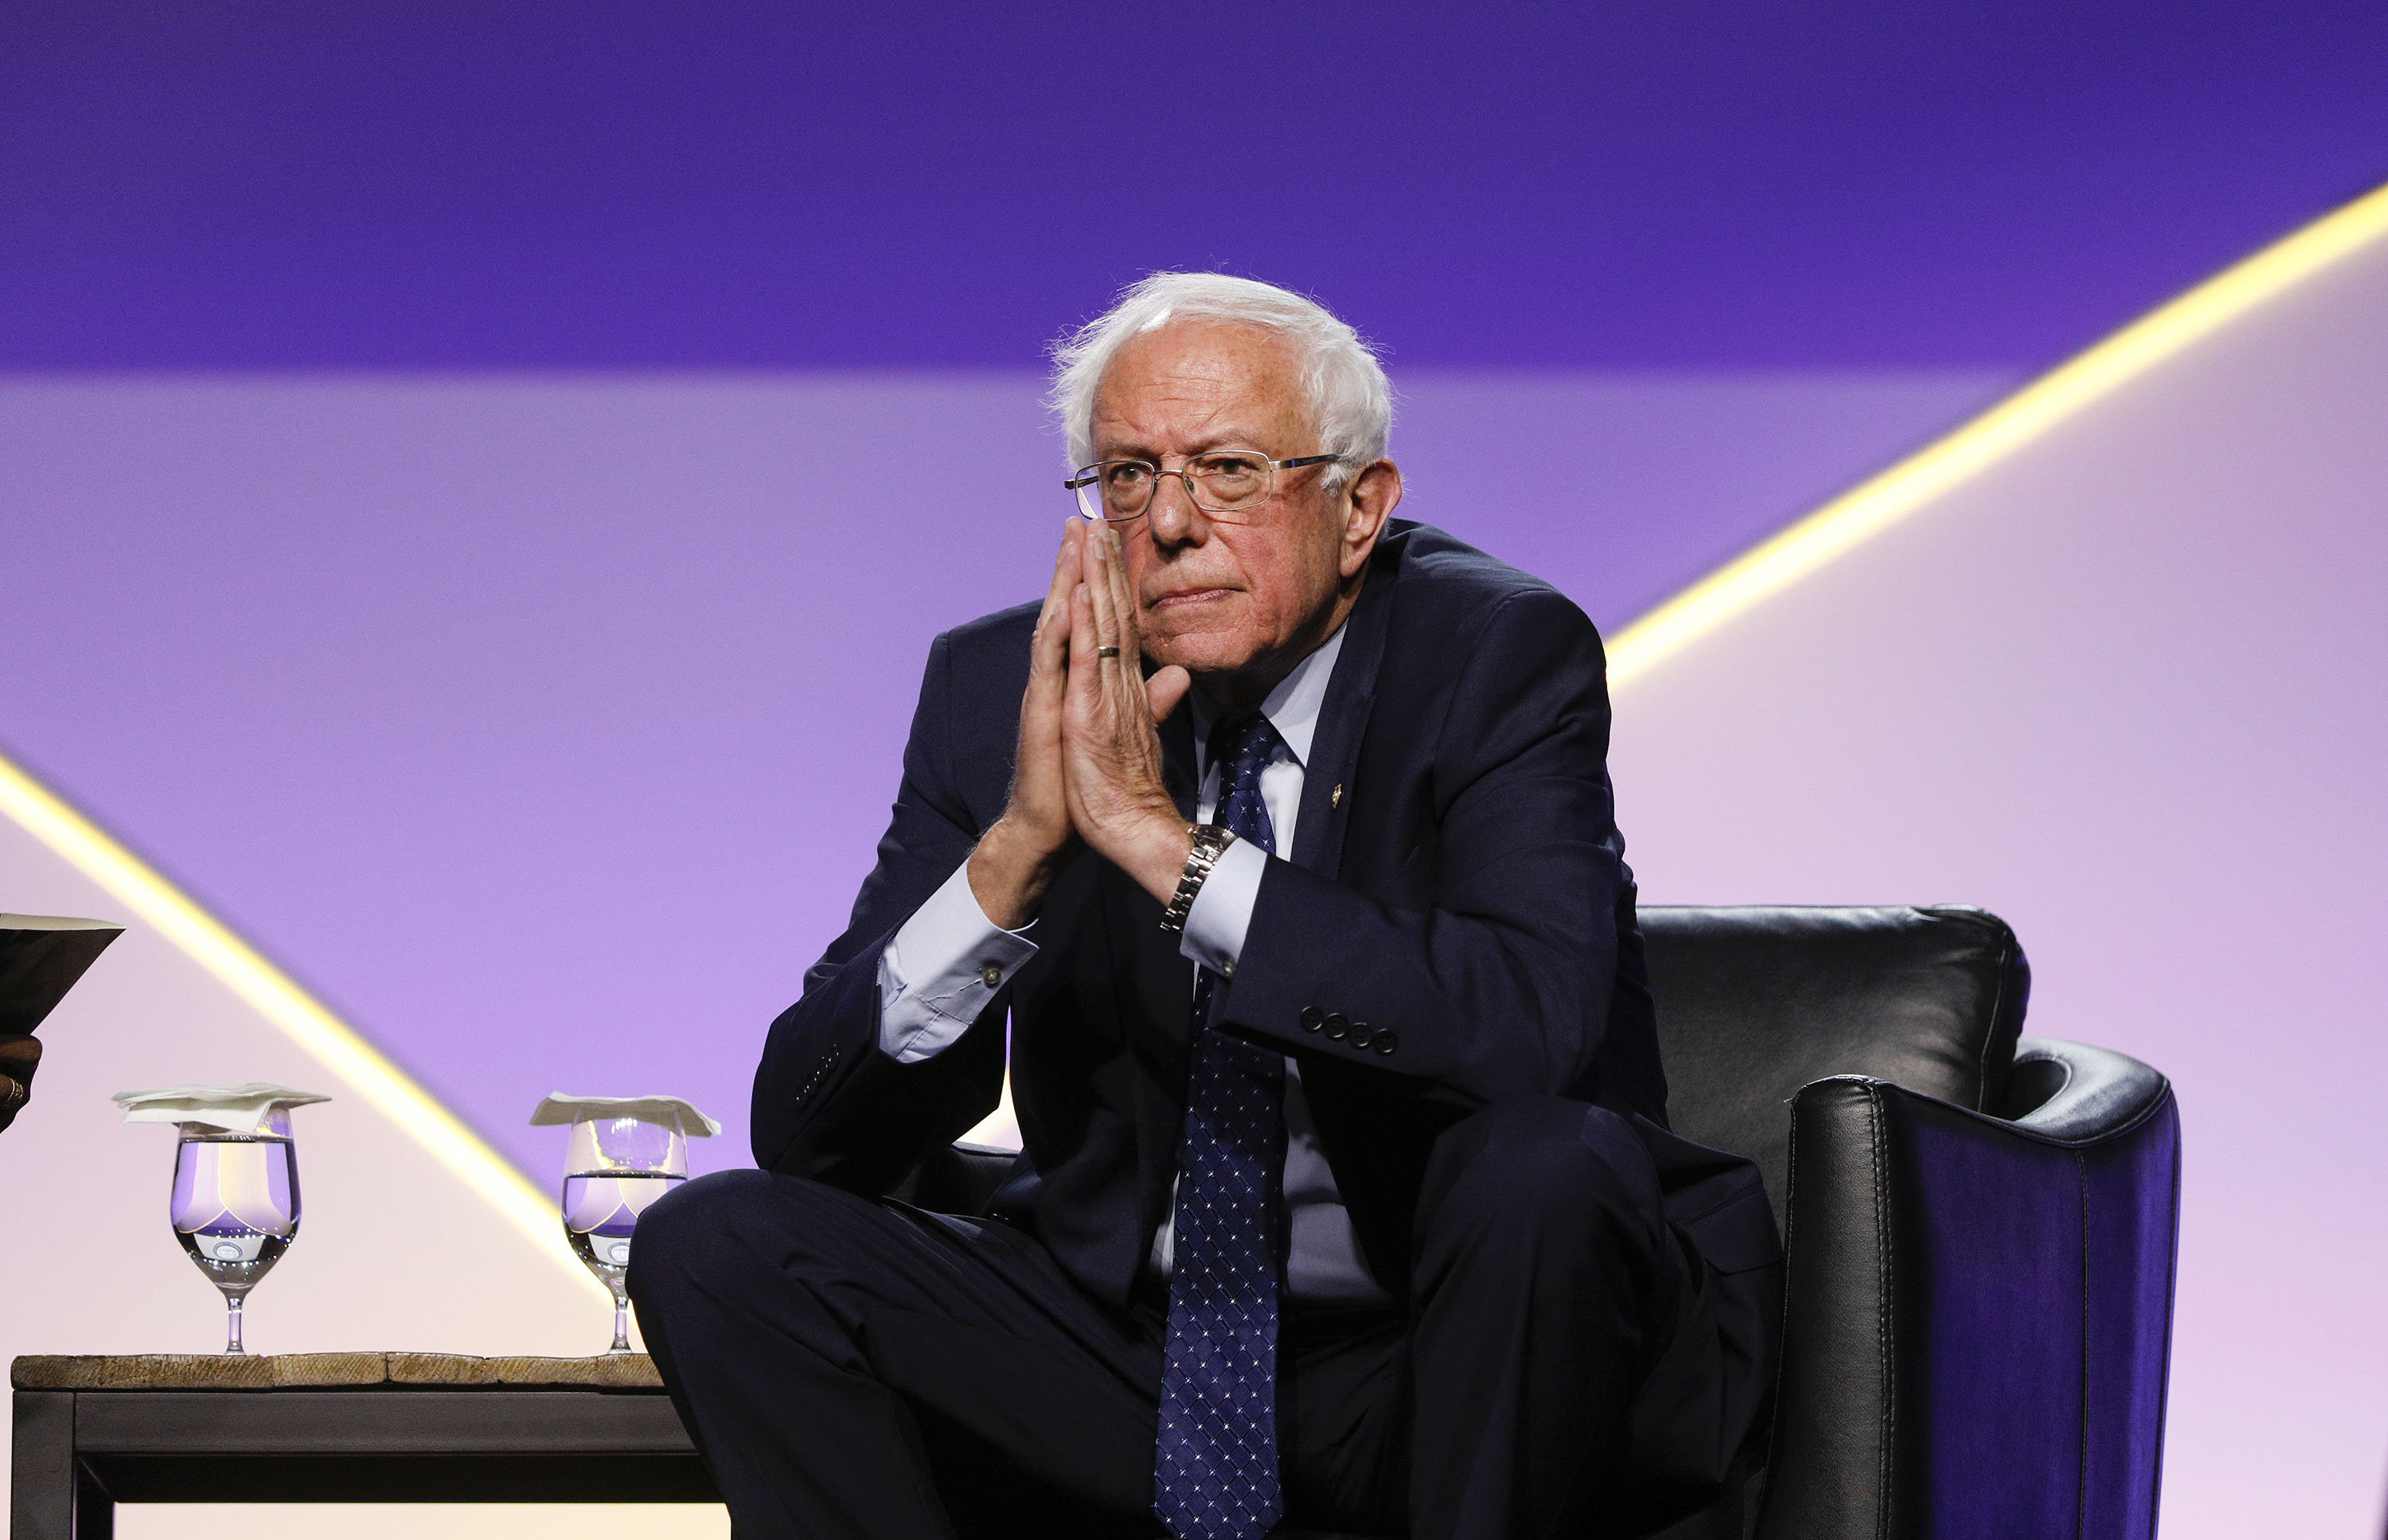 DETROIT, MI - JULY 24: Democratic presidential candidate U.S. Sen. Bernie Sanders (I-VT) participates in a Presidential Candidates Forum at the NAACP 110th National Convention on July 24, 2019 in Detroit, Michigan. The theme of this year's Convention is, When We Fight, We Win. (Photo by Bill Pugliano/Getty Images)